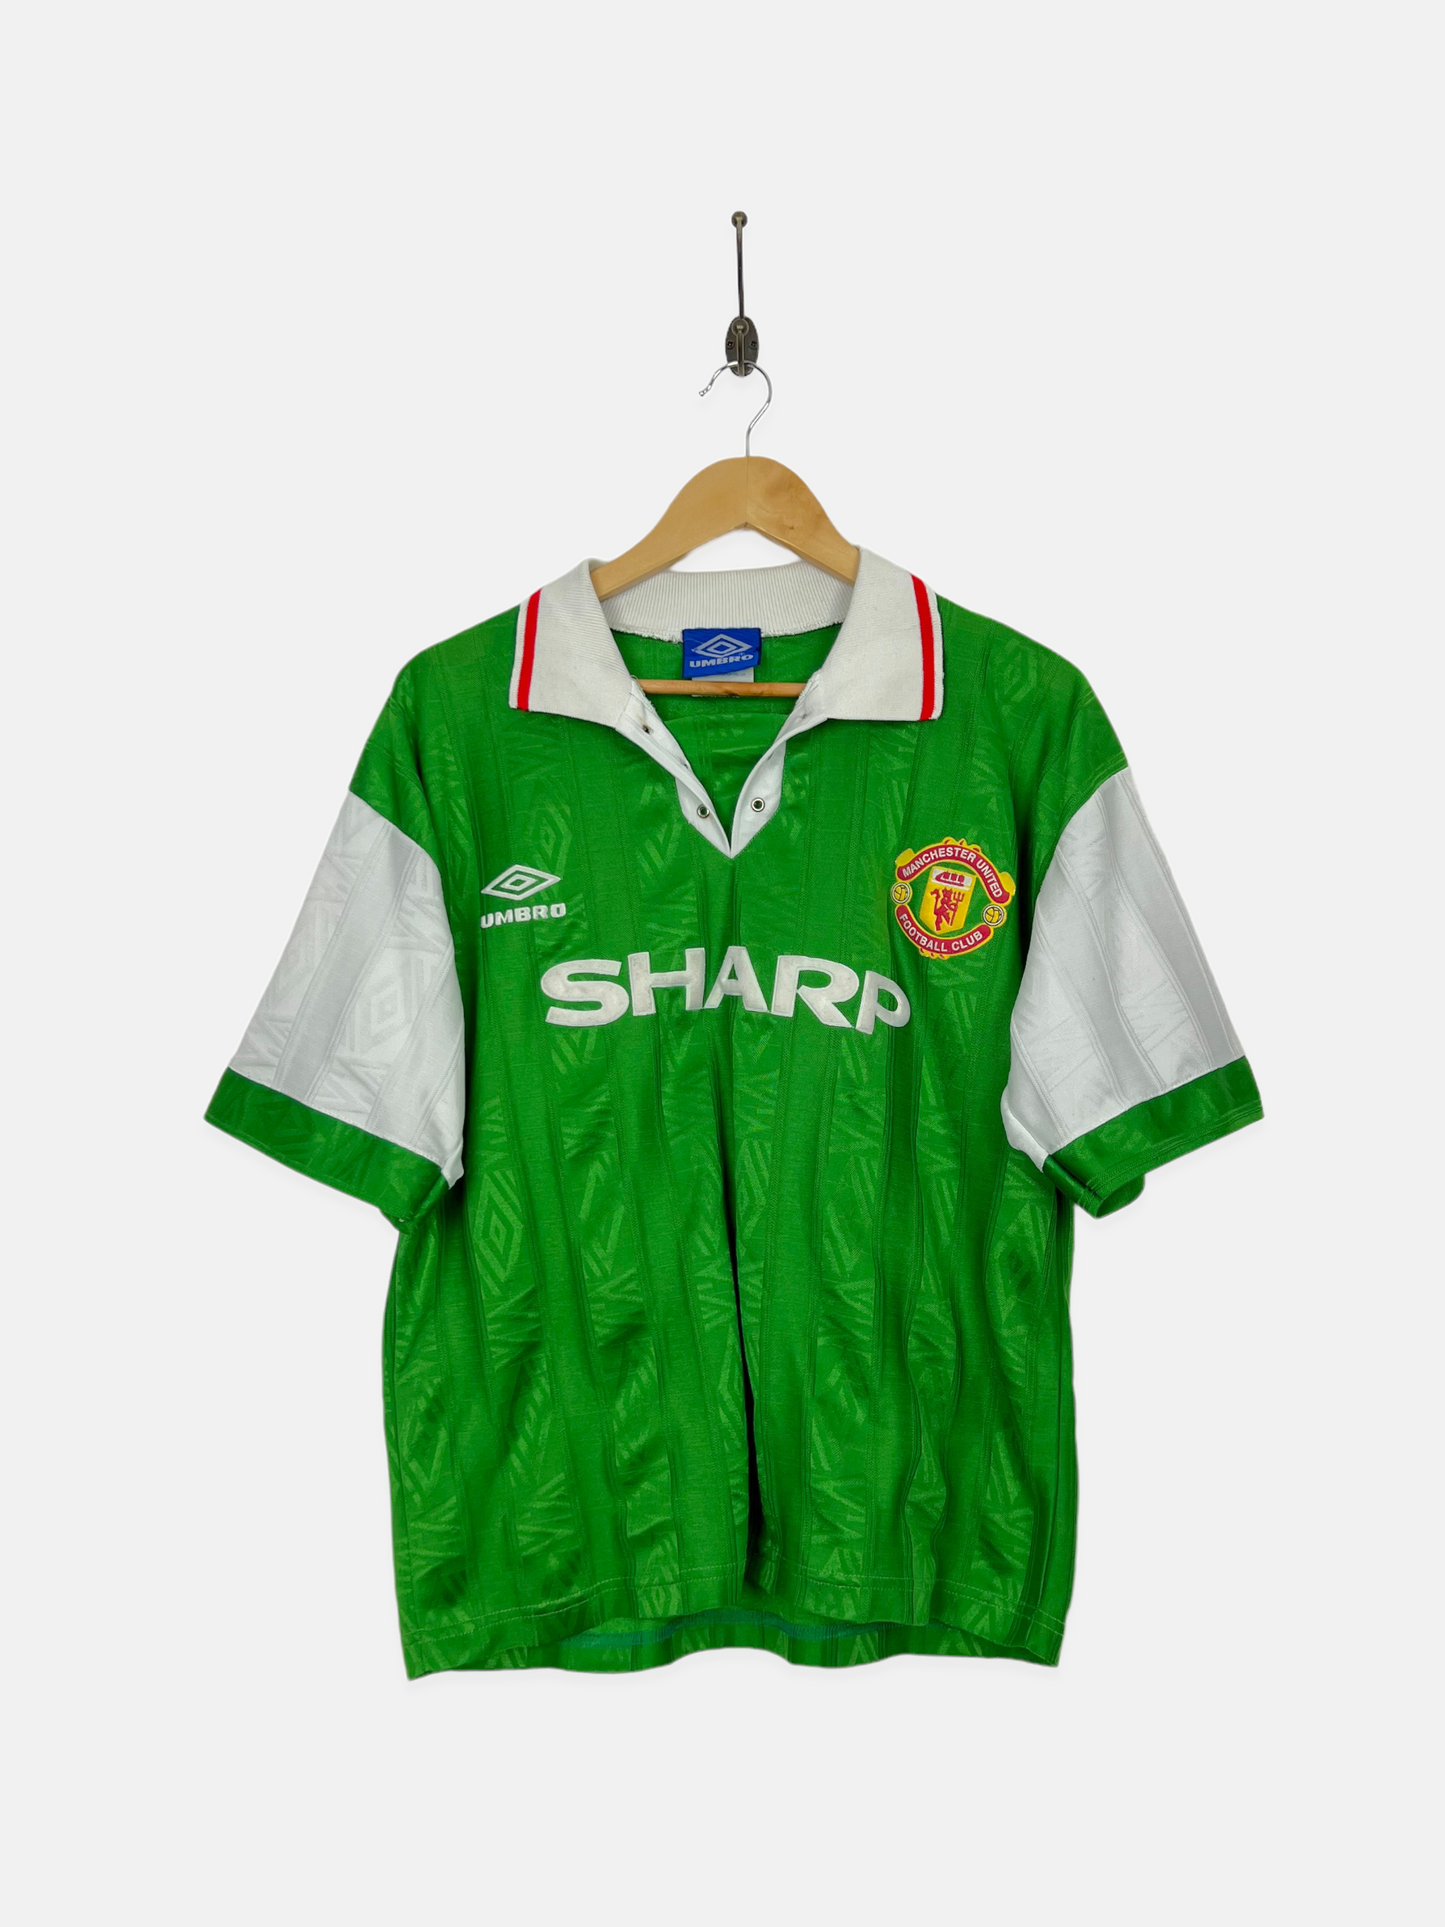 Manchester United Umbro 92/93 Vintage Football Jersey Size S-M